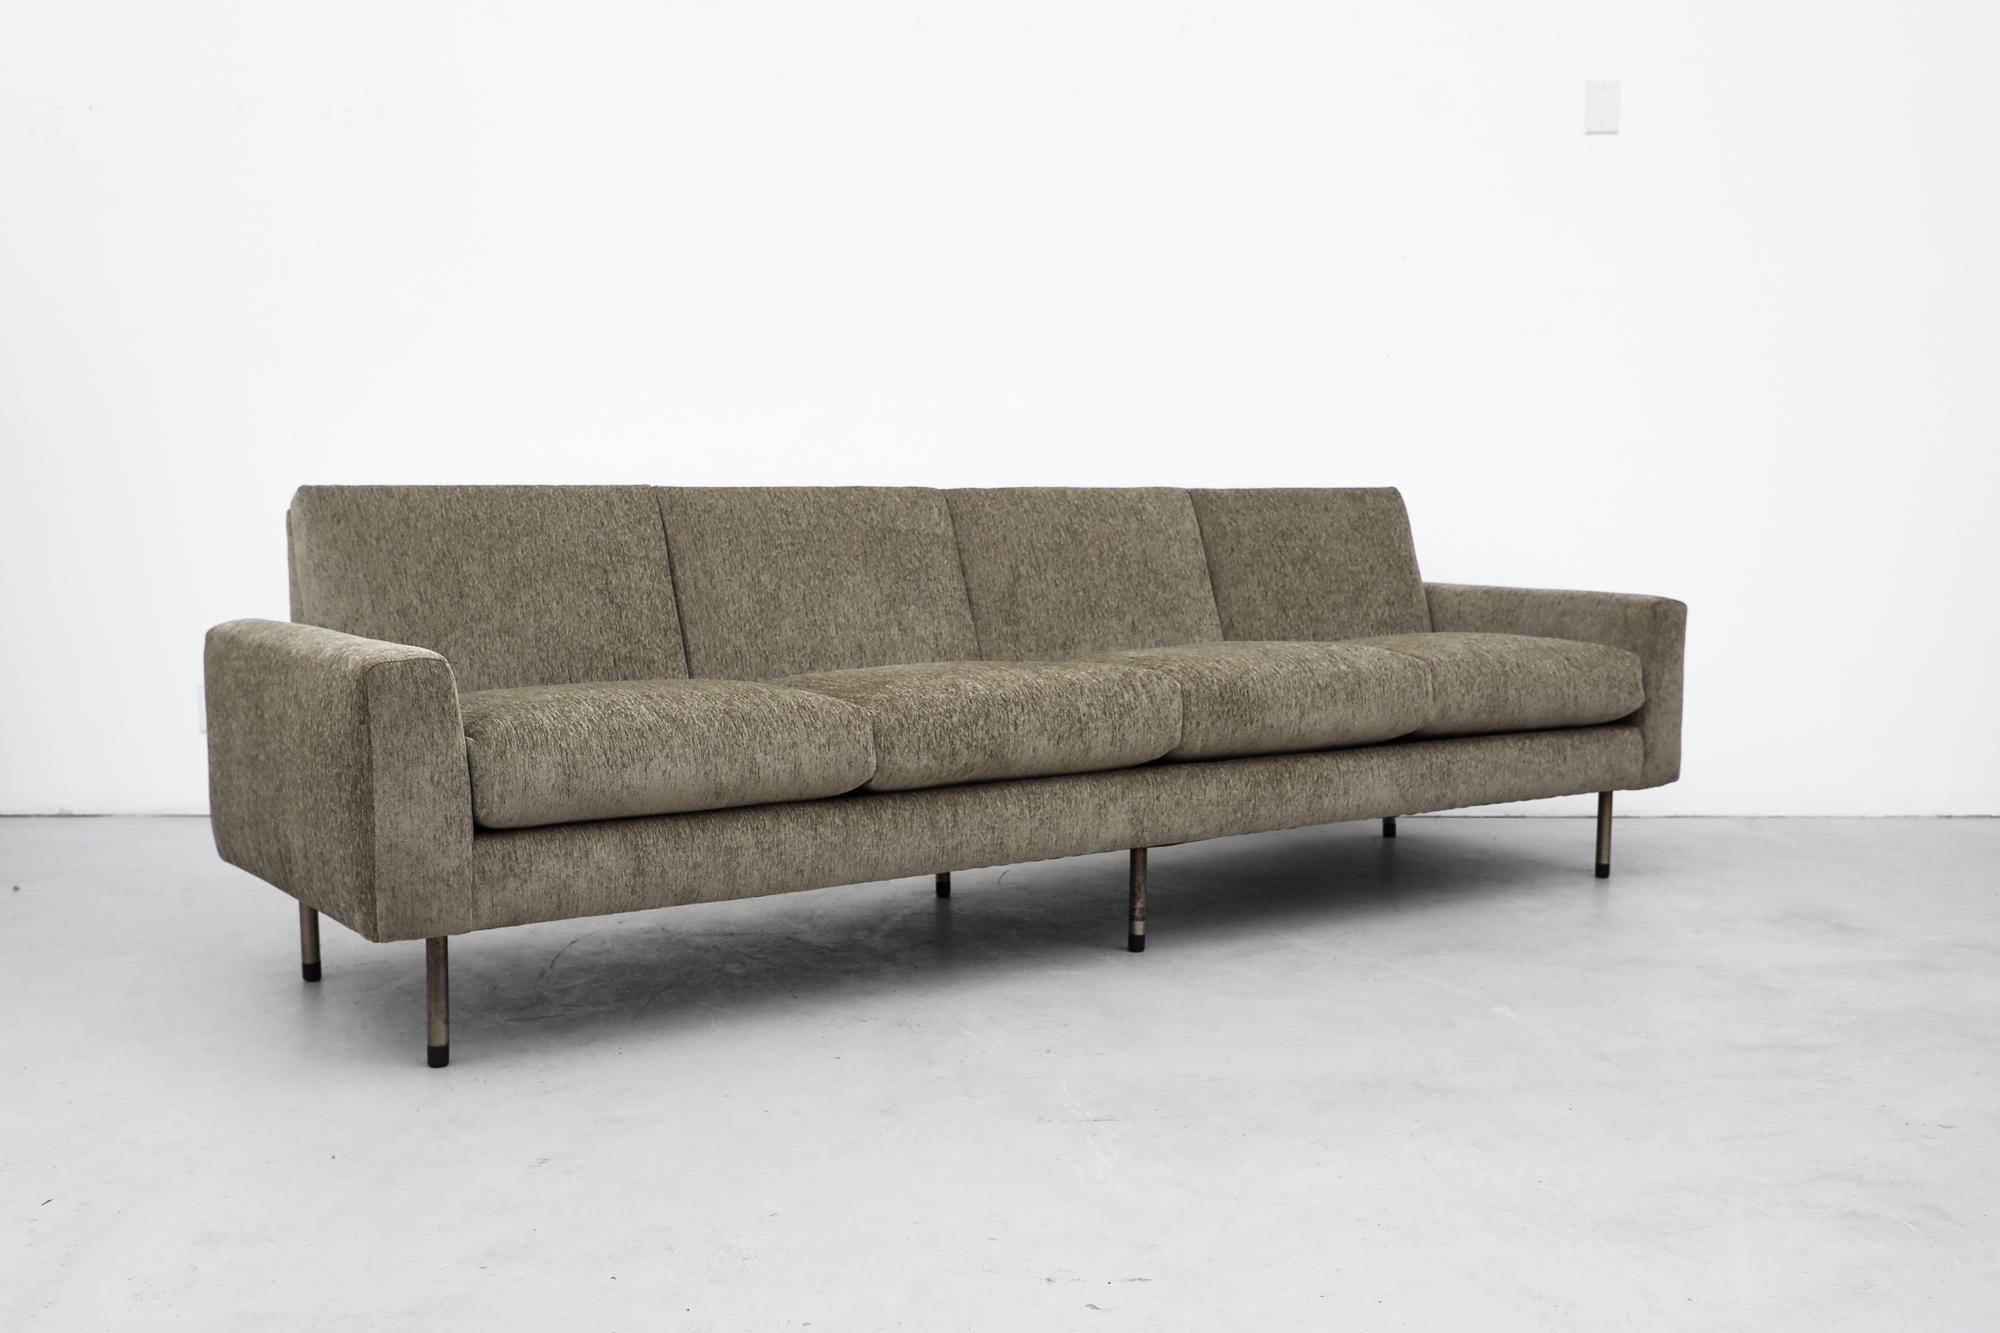 Extra long midcentury Gelderland 4 seater velour upholstered sofa by famed Dutch designer Rob Parry. Parry studied at the Royal Academy of Art in The Hague. After graduating, Parry started his own business. Until 1995 he designed interiors,